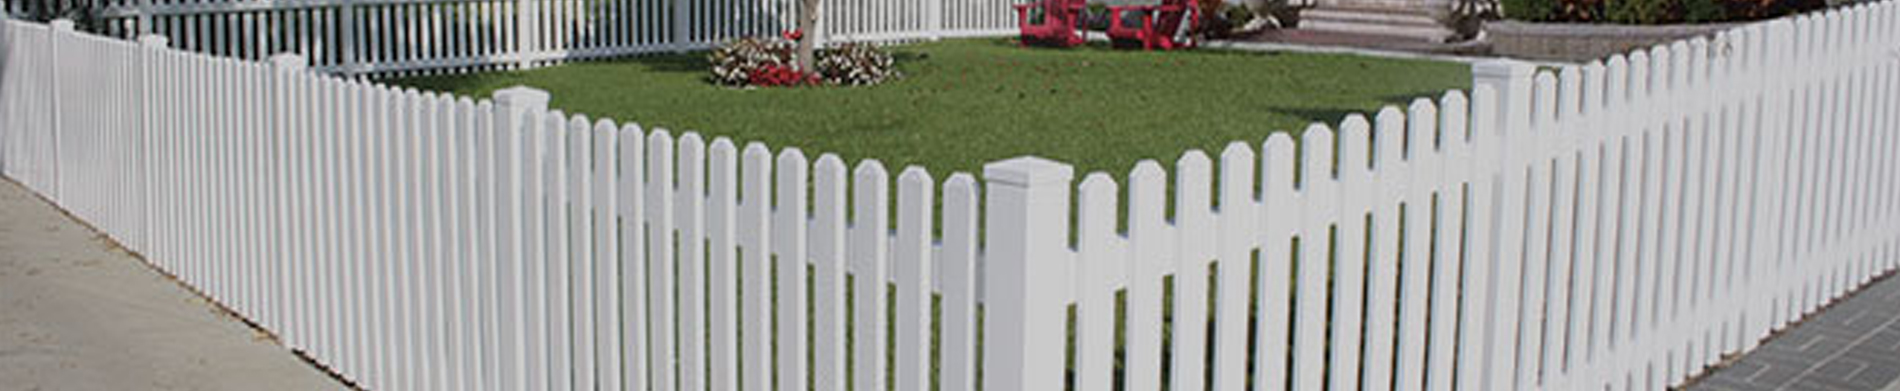 Why Do You Need a Fencing Calculator for Your Fence Project?